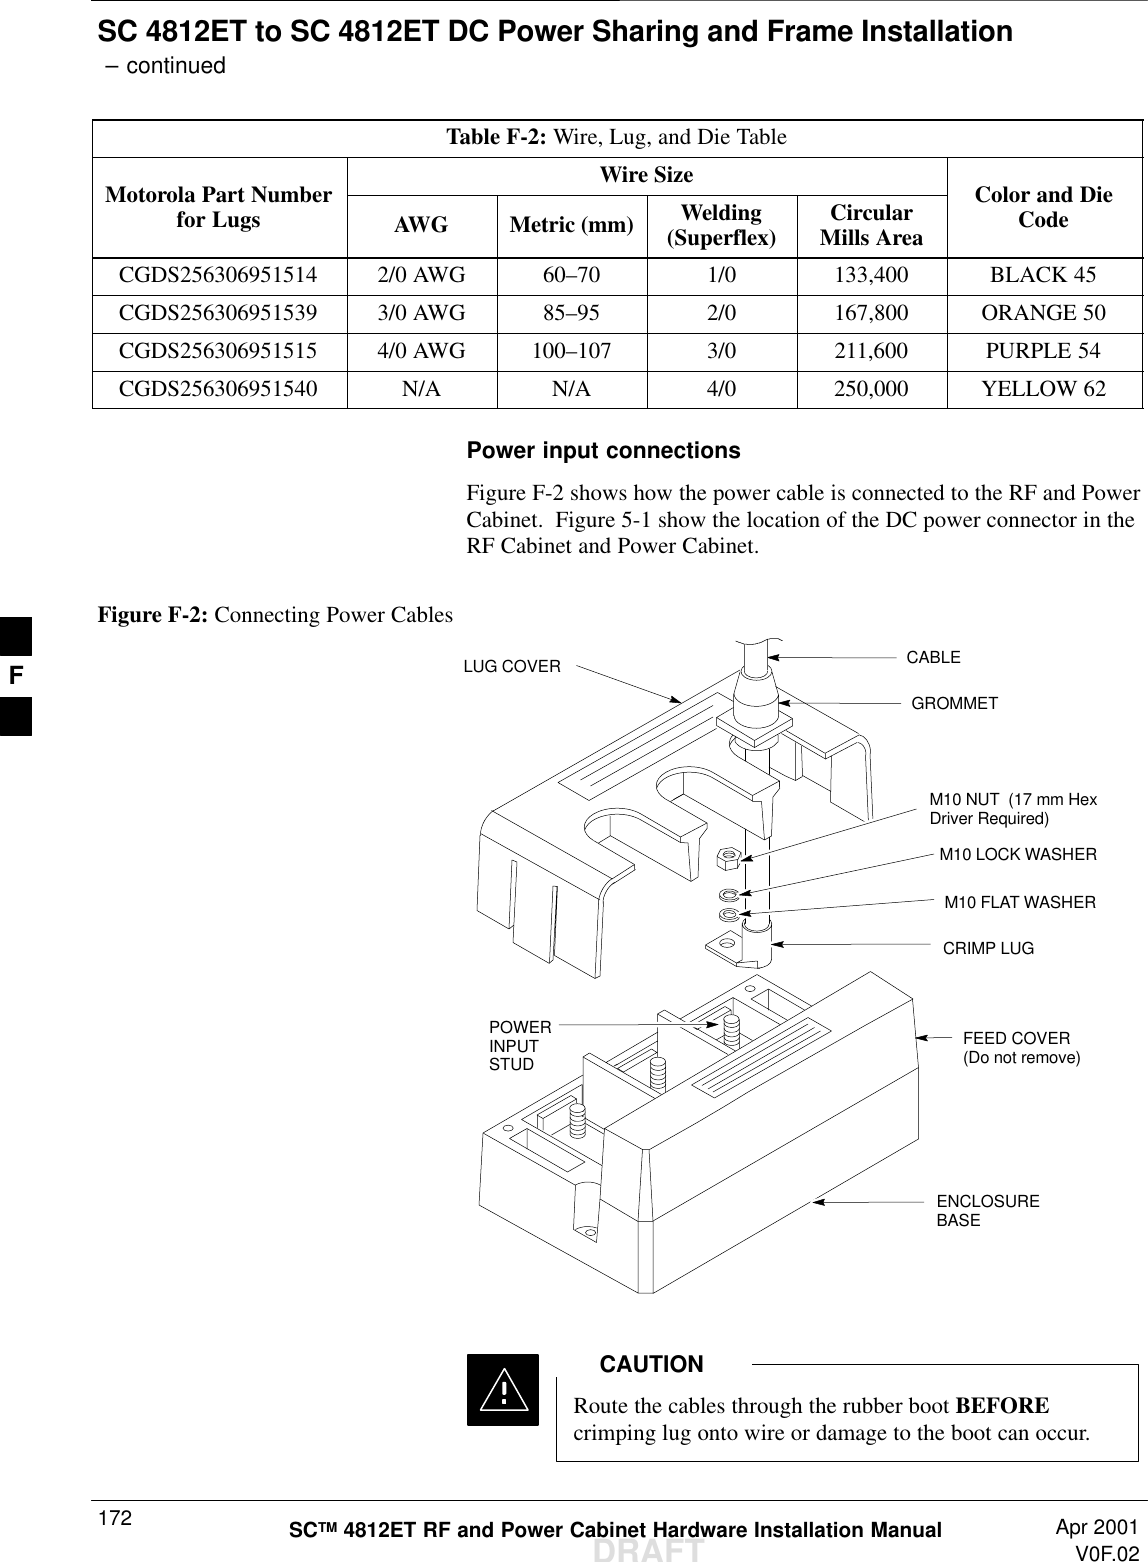 SC 4812ET to SC 4812ET DC Power Sharing and Frame Installation – continuedDRAFTSCTM 4812ET RF and Power Cabinet Hardware Installation Manual Apr 2001V0F.02172Table F-2: Wire, Lug, and Die TableWire SizeMotorola Part Numberfor Lugs AWG Metric (mm) Welding(Superflex) CircularMills AreaColor and DieCodeCGDS256306951514 2/0 AWG 60–70 1/0 133,400 BLACK 45CGDS256306951539 3/0 AWG 85–95 2/0 167,800 ORANGE 50CGDS256306951515 4/0 AWG 100–107 3/0 211,600 PURPLE 54CGDS256306951540 N/A N/A 4/0 250,000 YELLOW 62Power input connectionsFigure F-2 shows how the power cable is connected to the RF and PowerCabinet.  Figure 5-1 show the location of the DC power connector in theRF Cabinet and Power Cabinet.Figure F-2: Connecting Power CablesCABLEGROMMETLUG COVERM10 NUT  (17 mm HexDriver Required)M10 LOCK WASHERM10 FLAT WASHERCRIMP LUGFEED COVER(Do not remove)ENCLOSUREBASEPOWERINPUTSTUD Route the cables through the rubber boot BEFOREcrimping lug onto wire or damage to the boot can occur.CAUTIONF